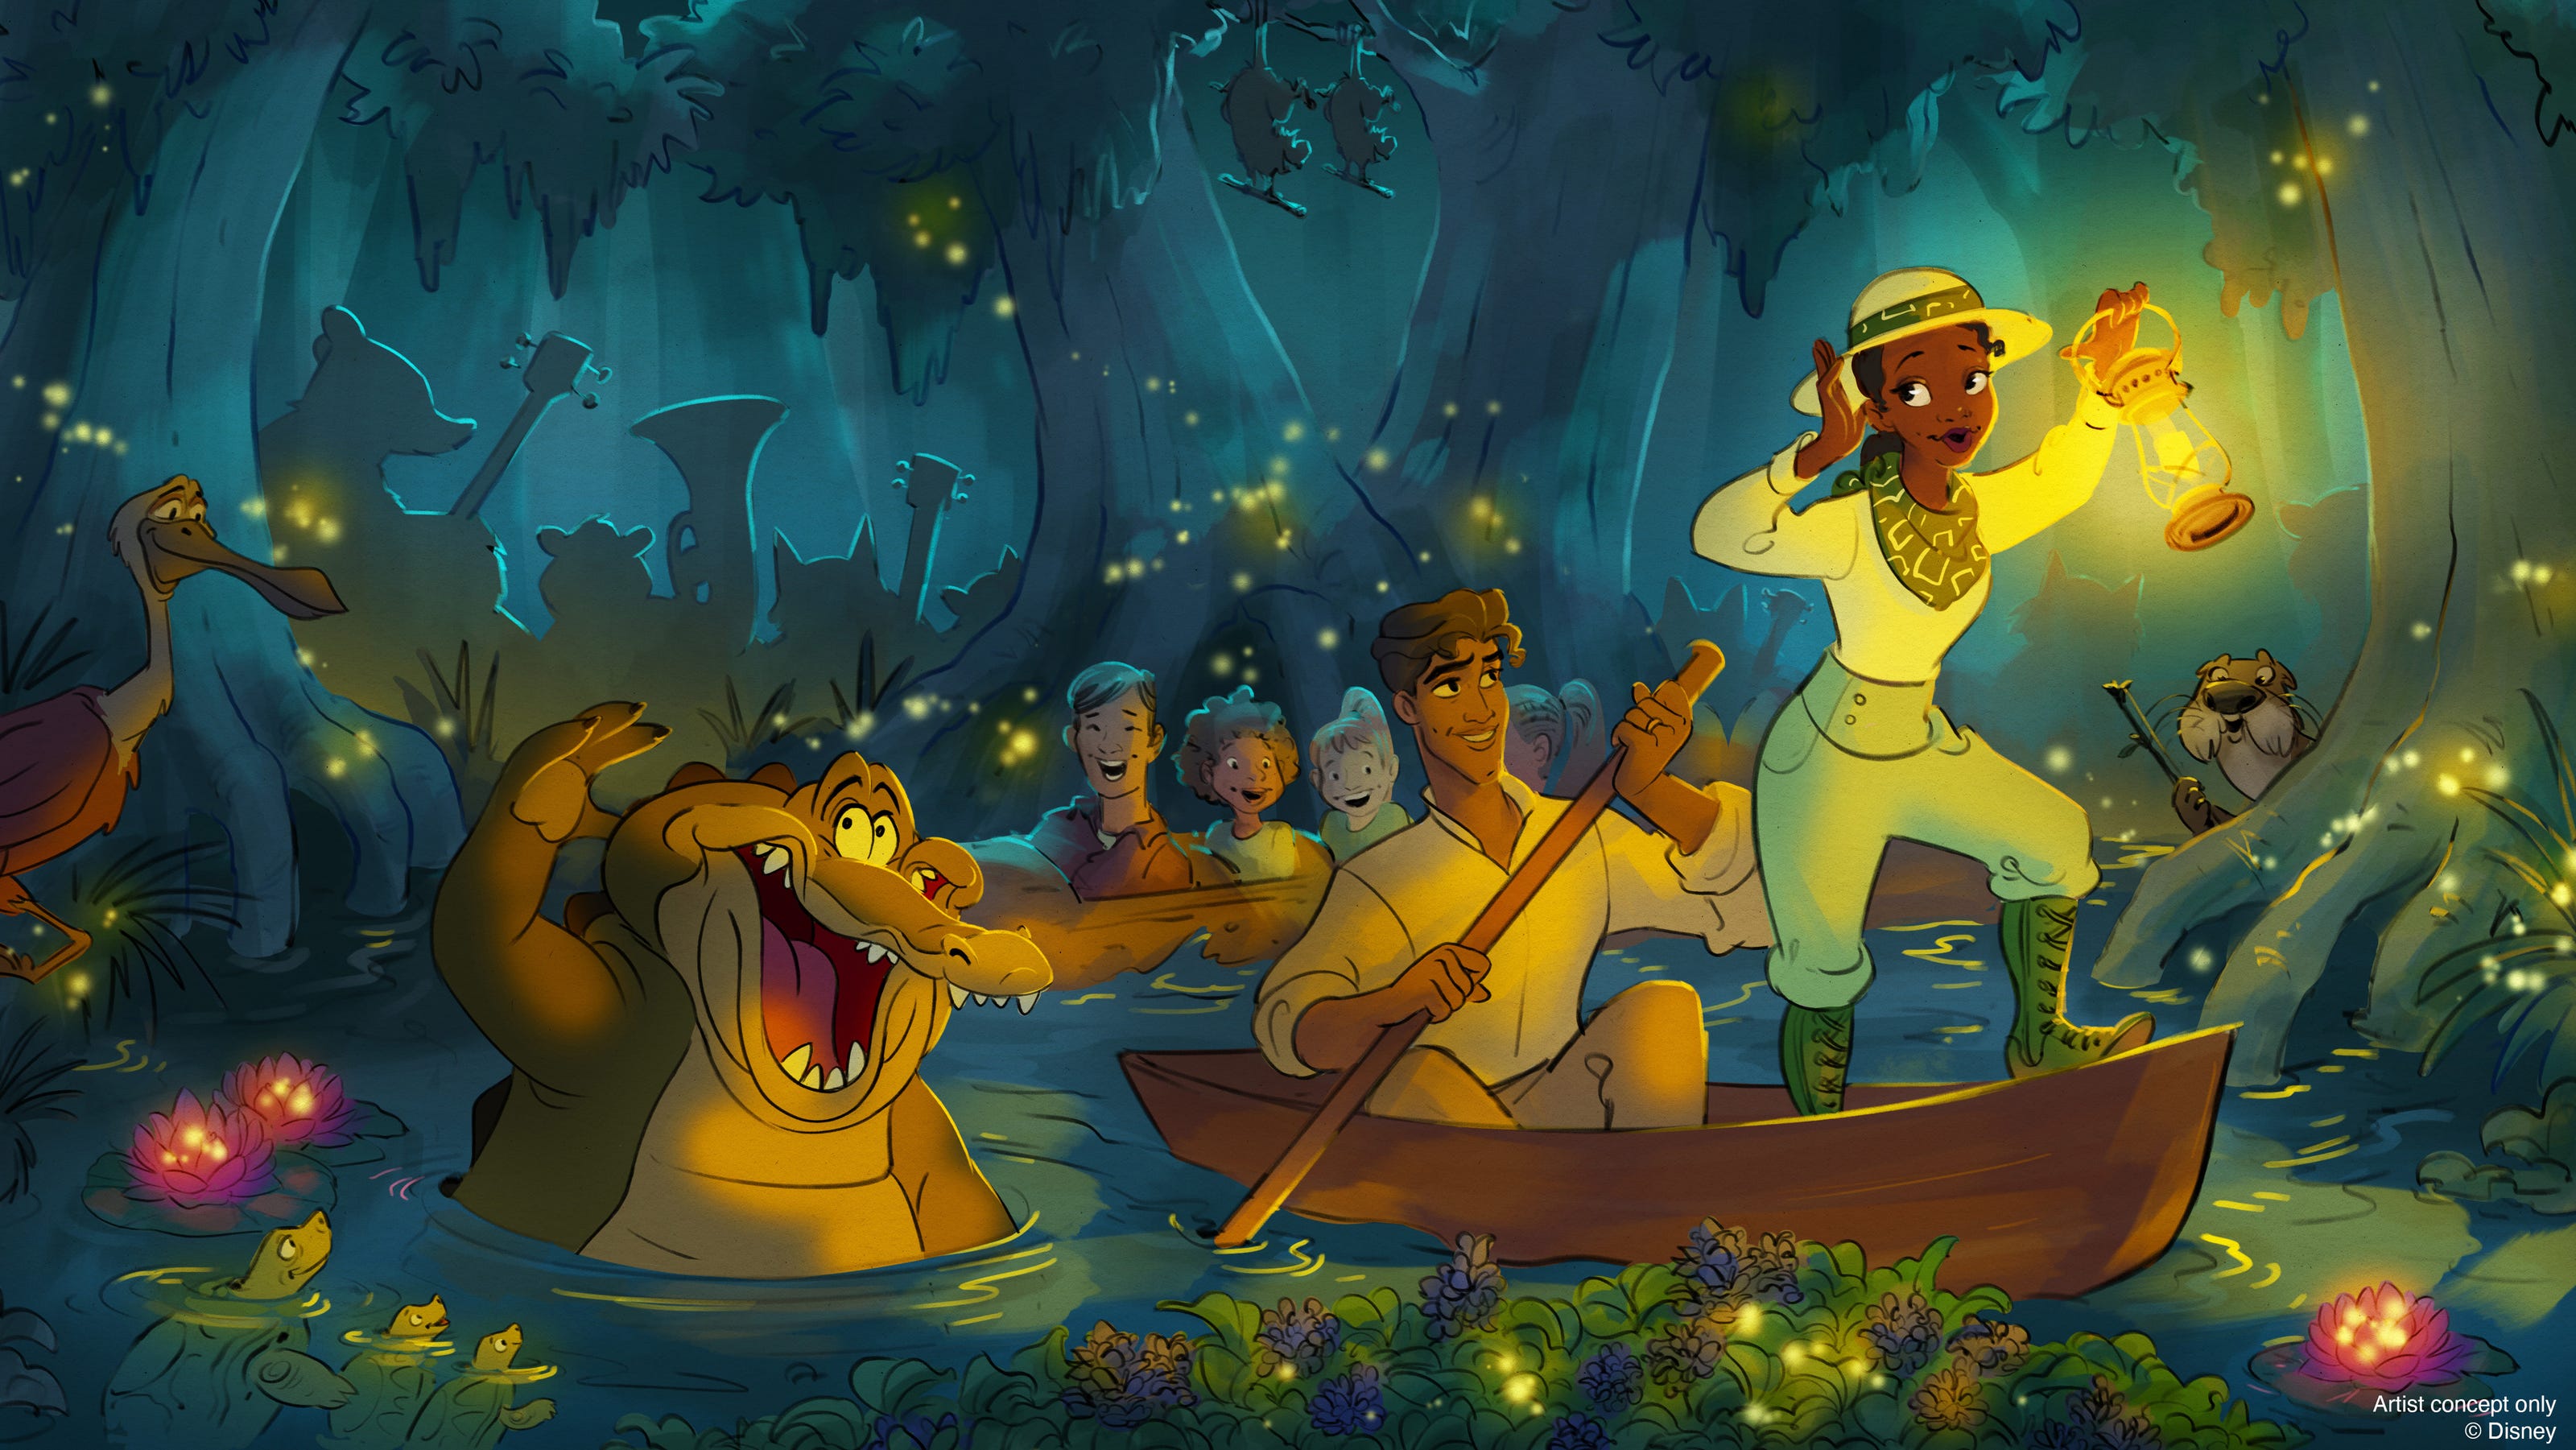 Disney's 'Princess and the Frog' Splash Mountain makeover coming 2024